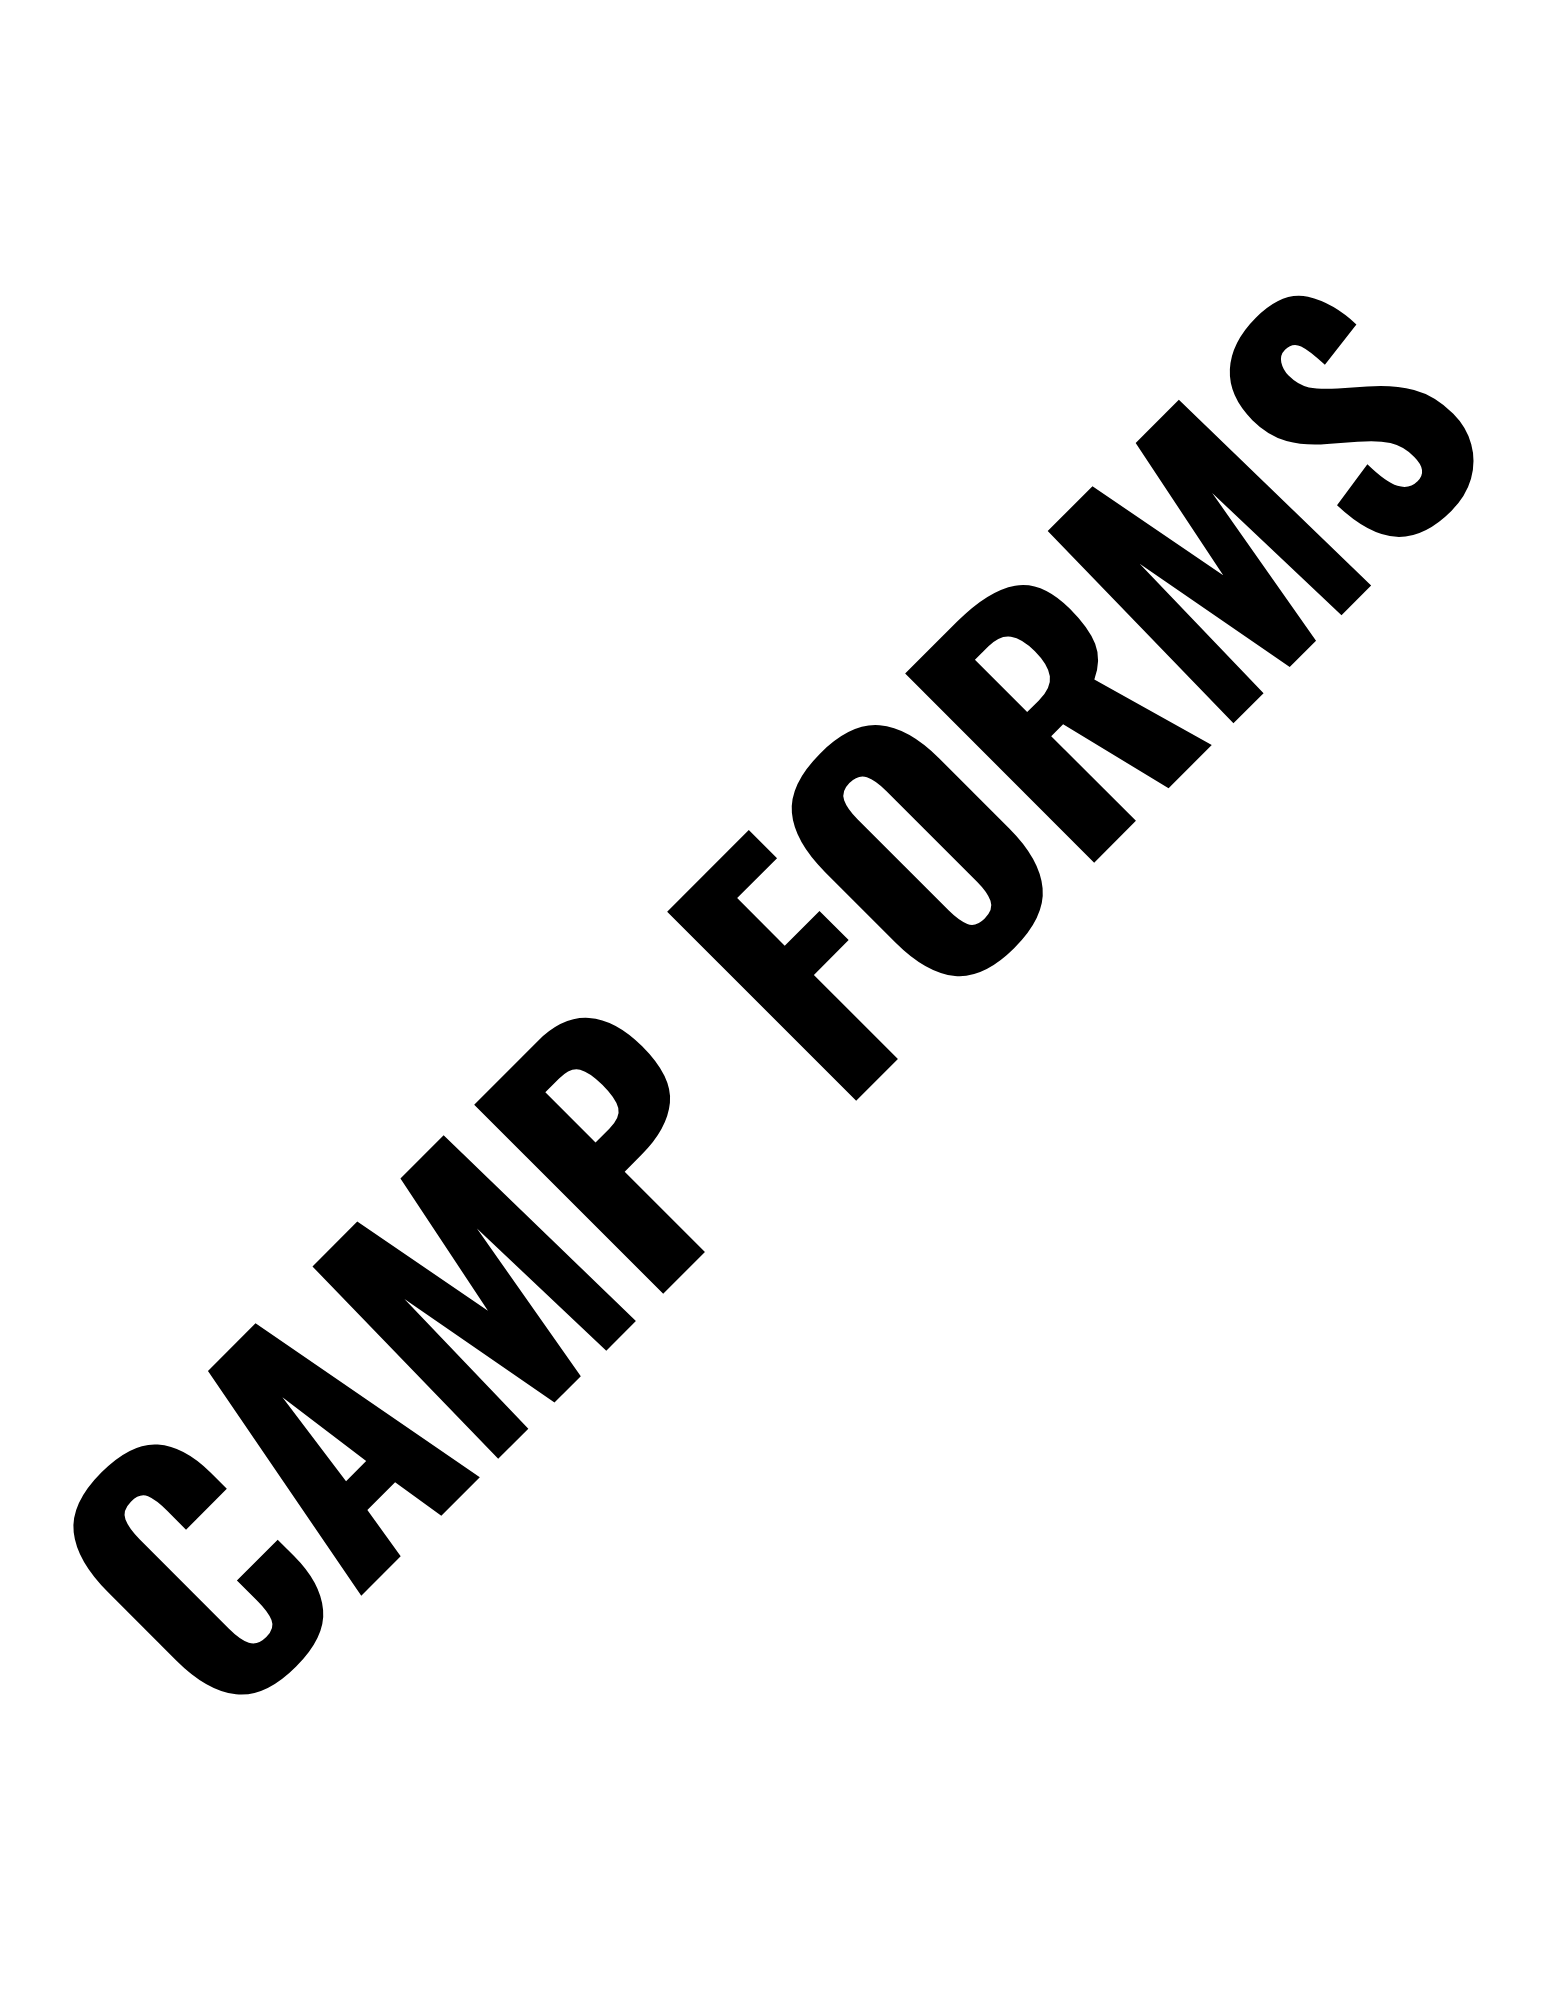 CAMP FORMS